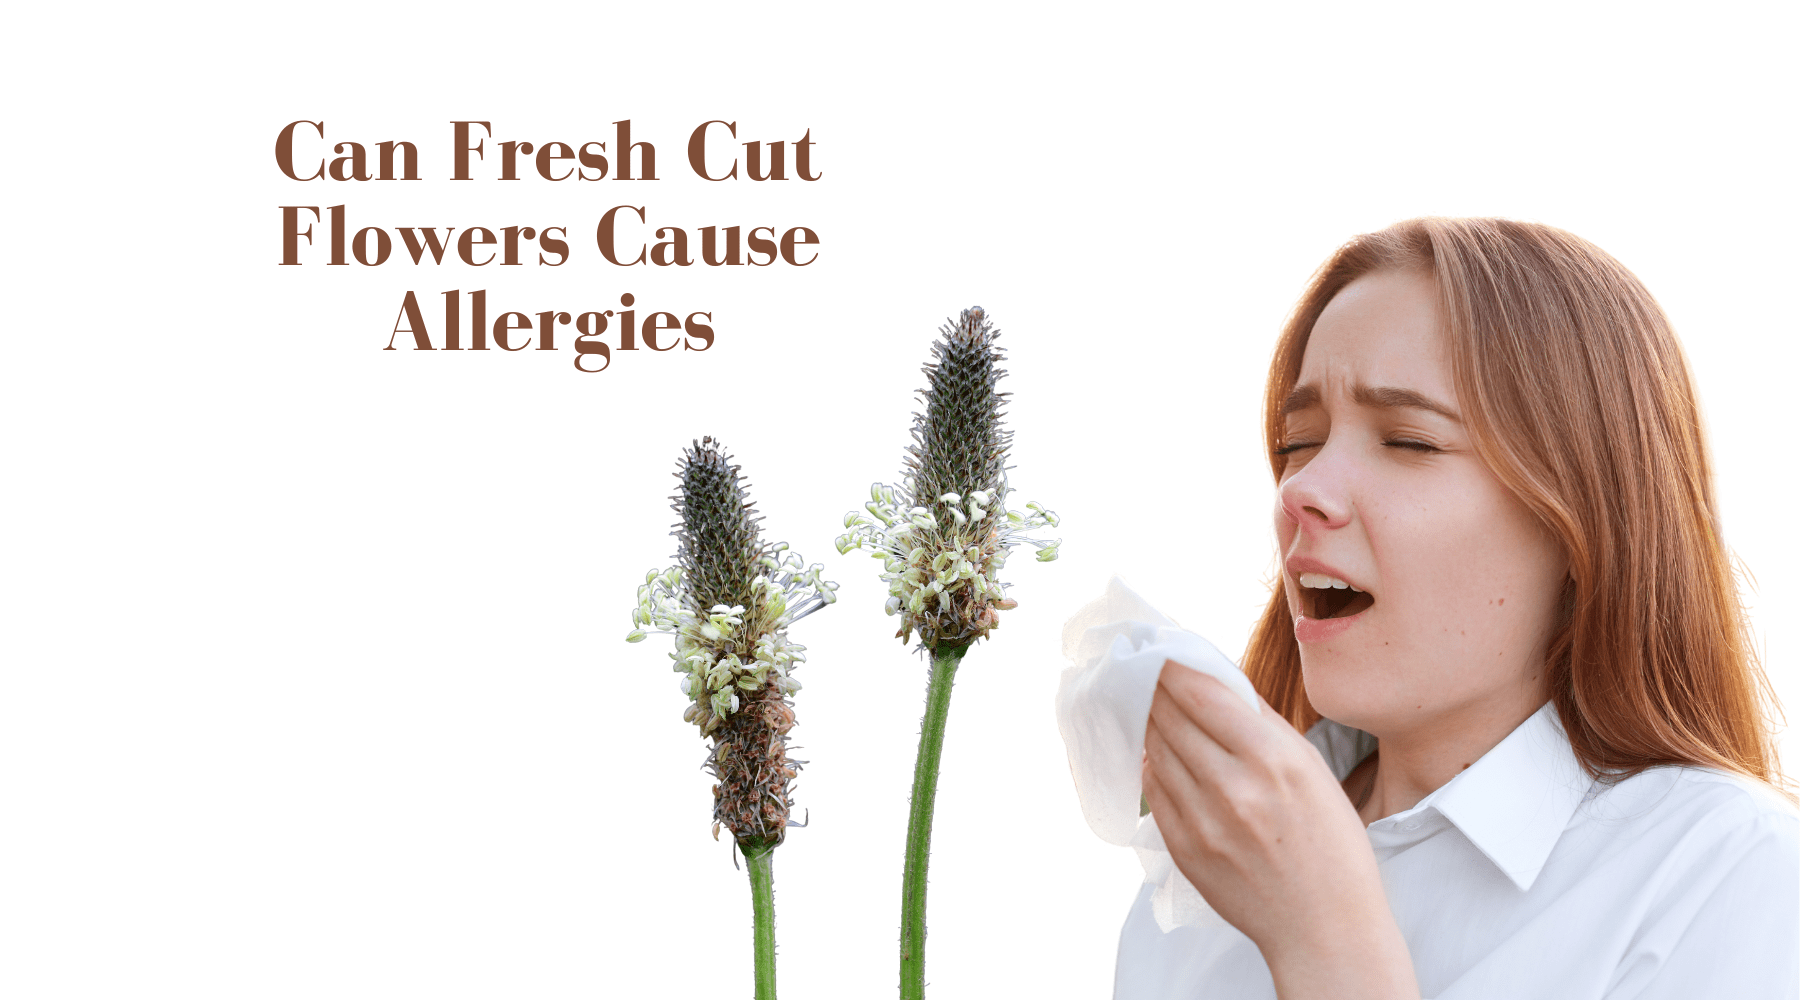 Can Fresh Cut Flowers Cause Allergies